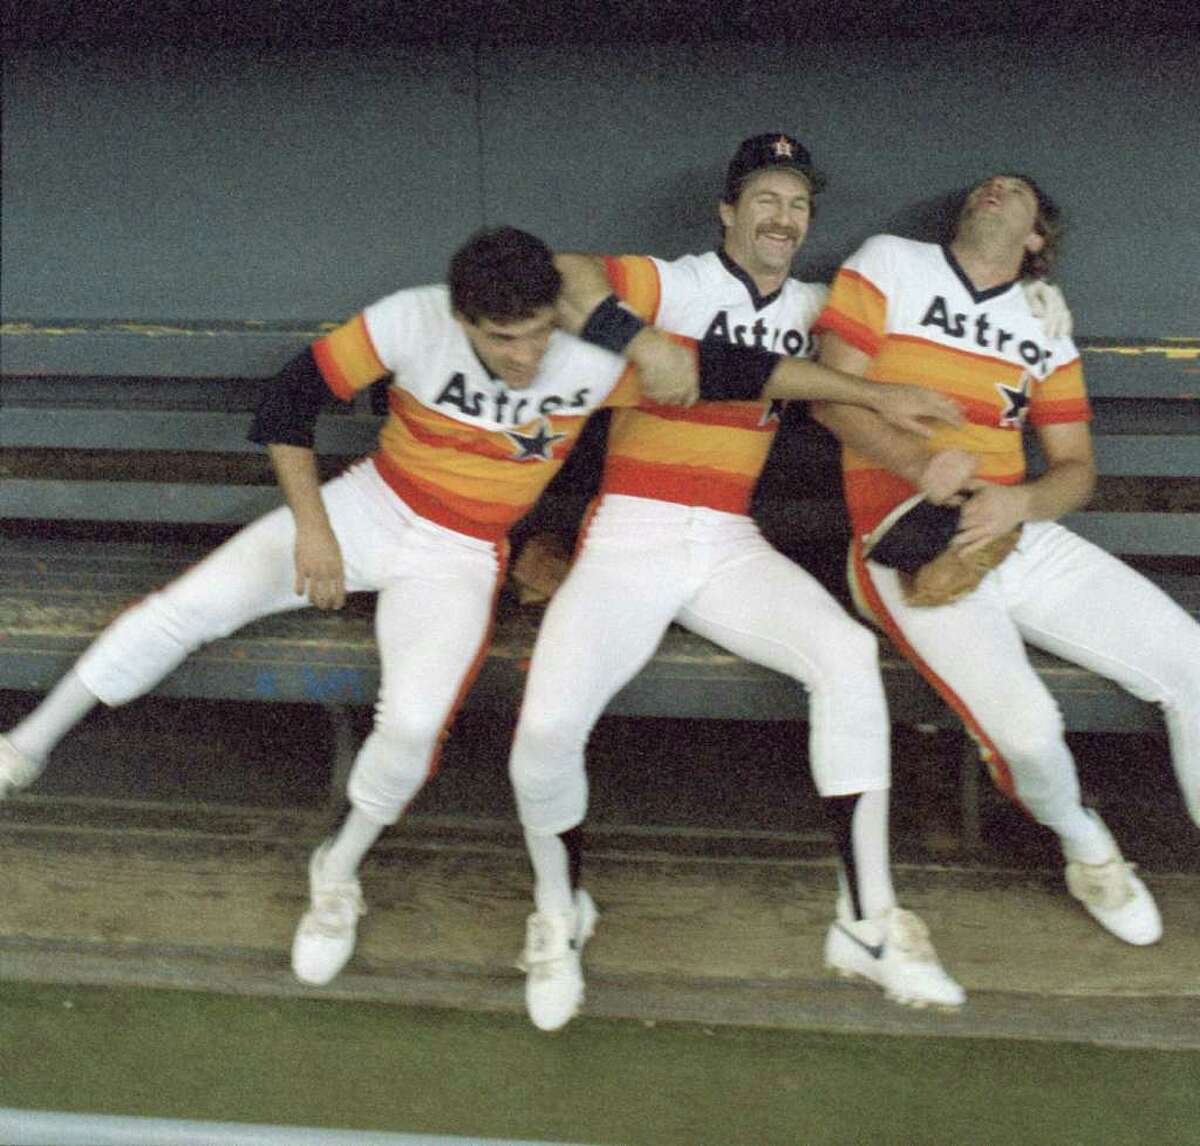 Astros' once-mocked 'rainbow' uniforms are now a fan favorite